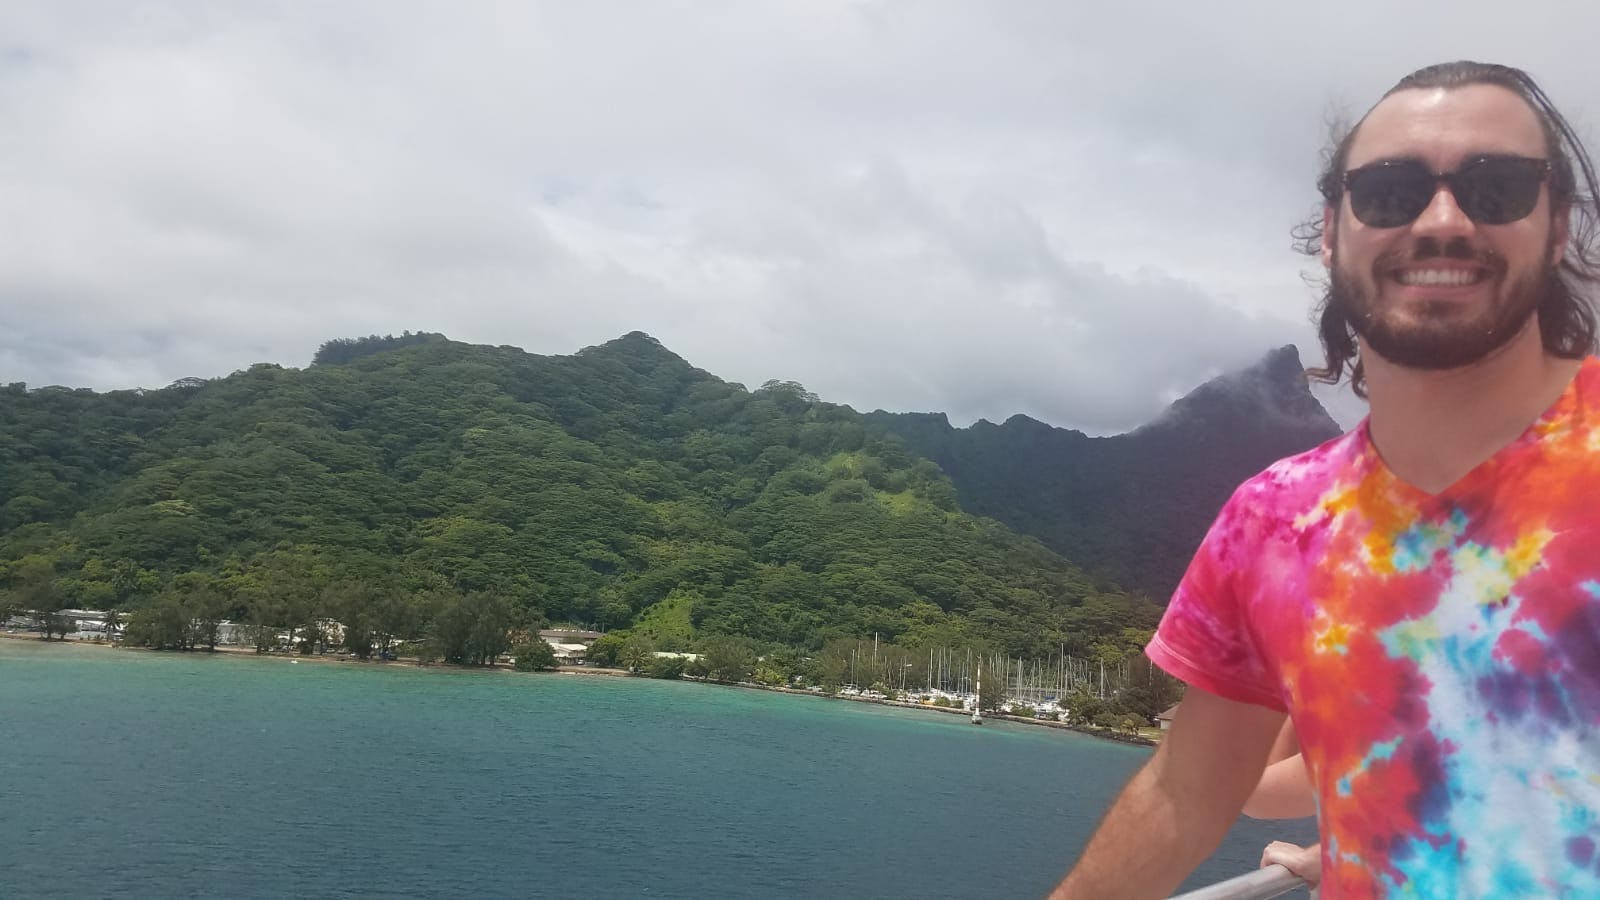 Gerrod excited to finally arrive at Mo’orea